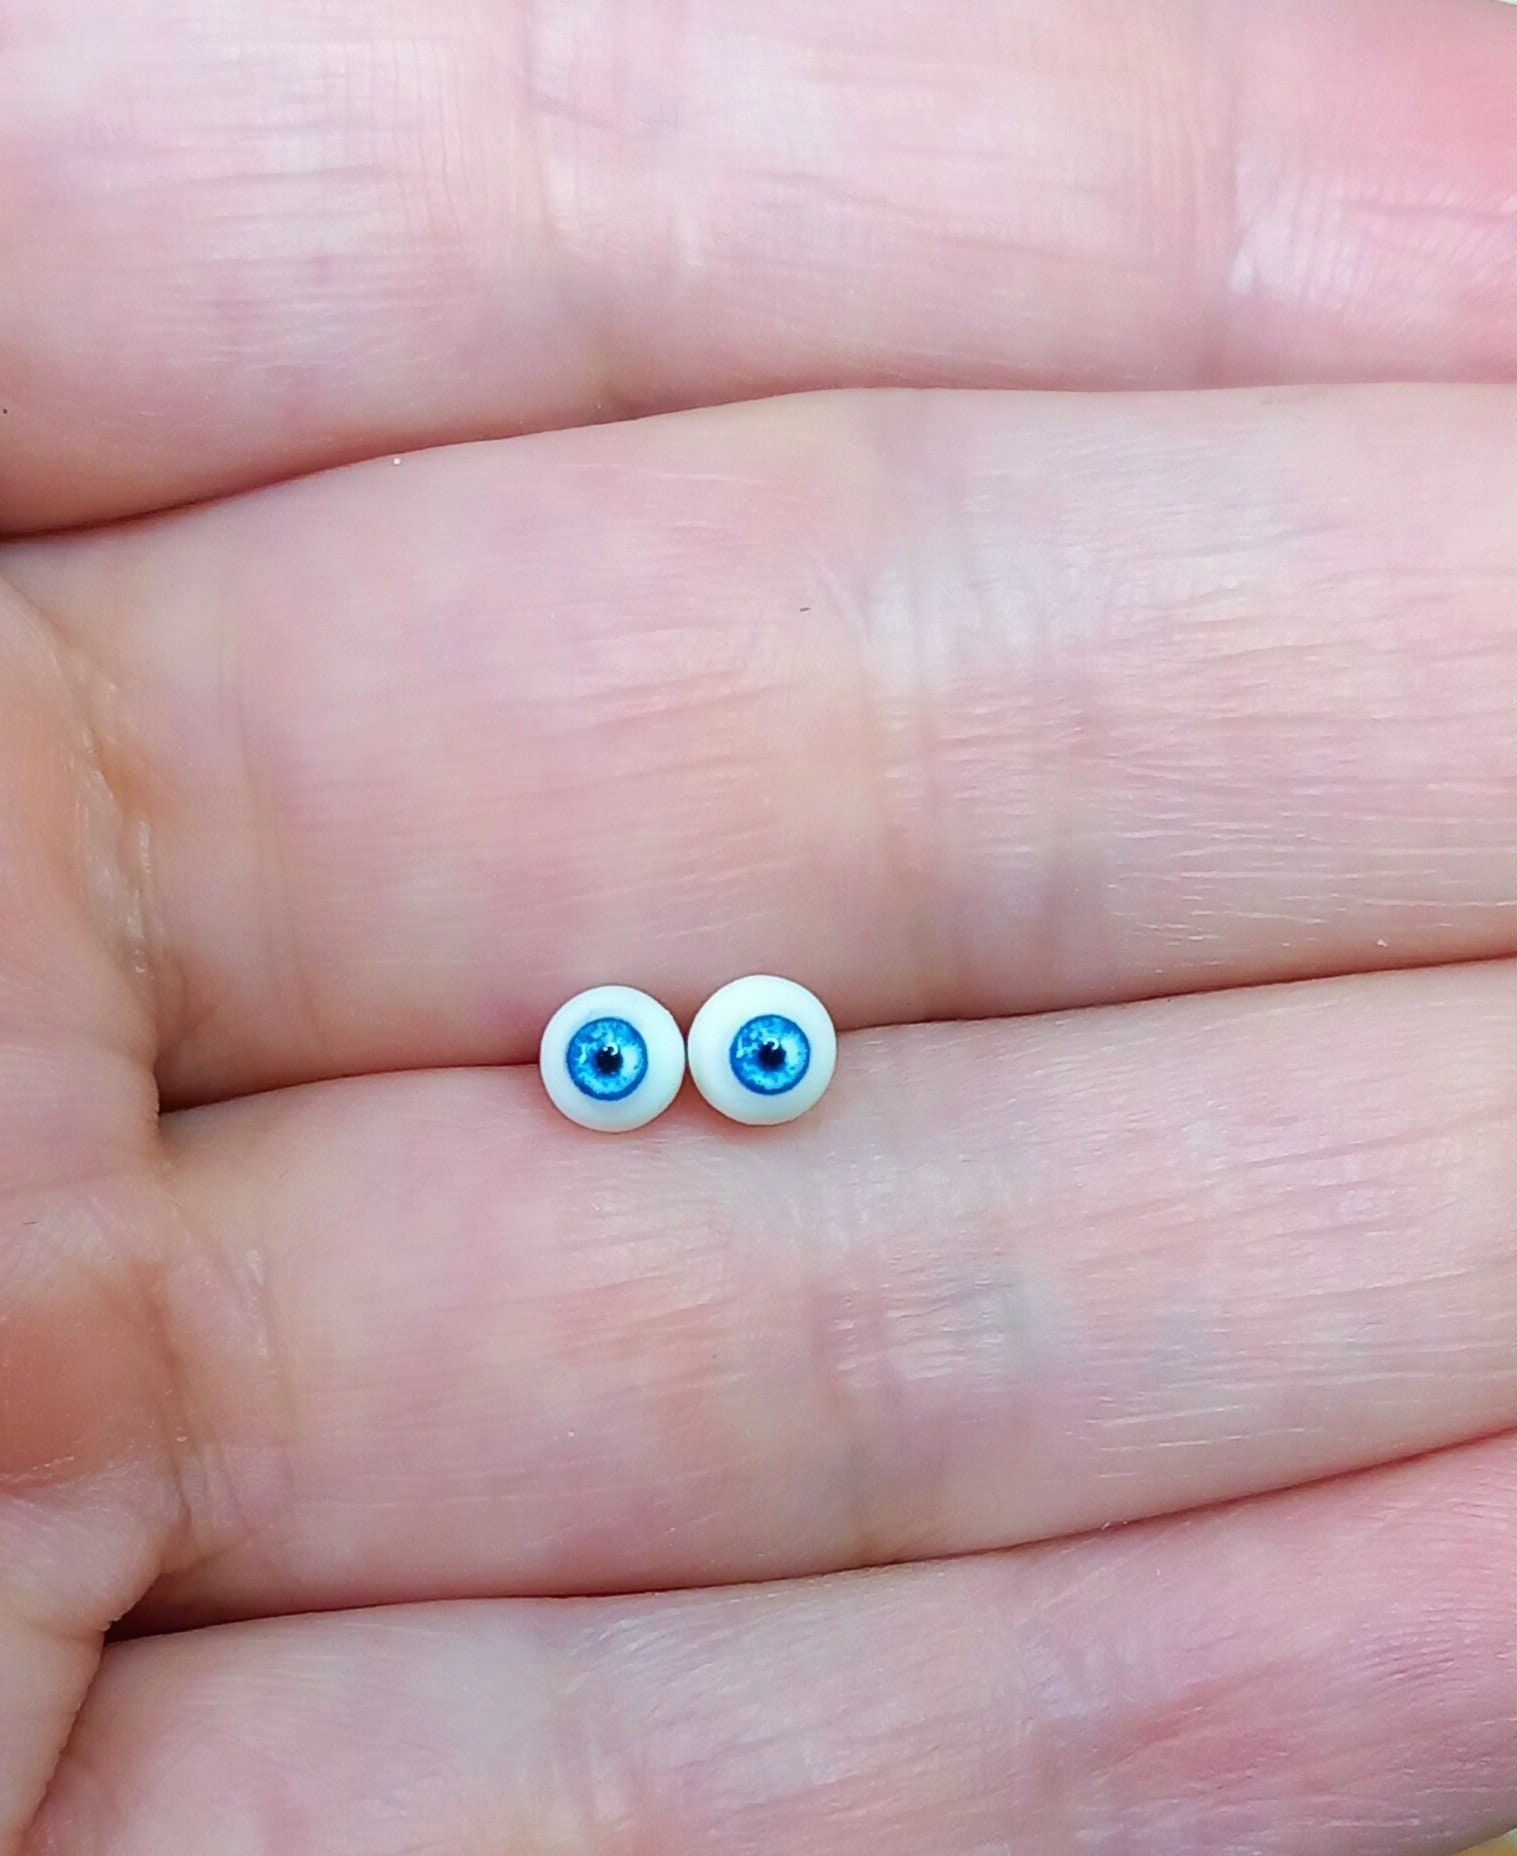 6mm Blue Color Round Craft Eyes with Black Pupils with washers 5